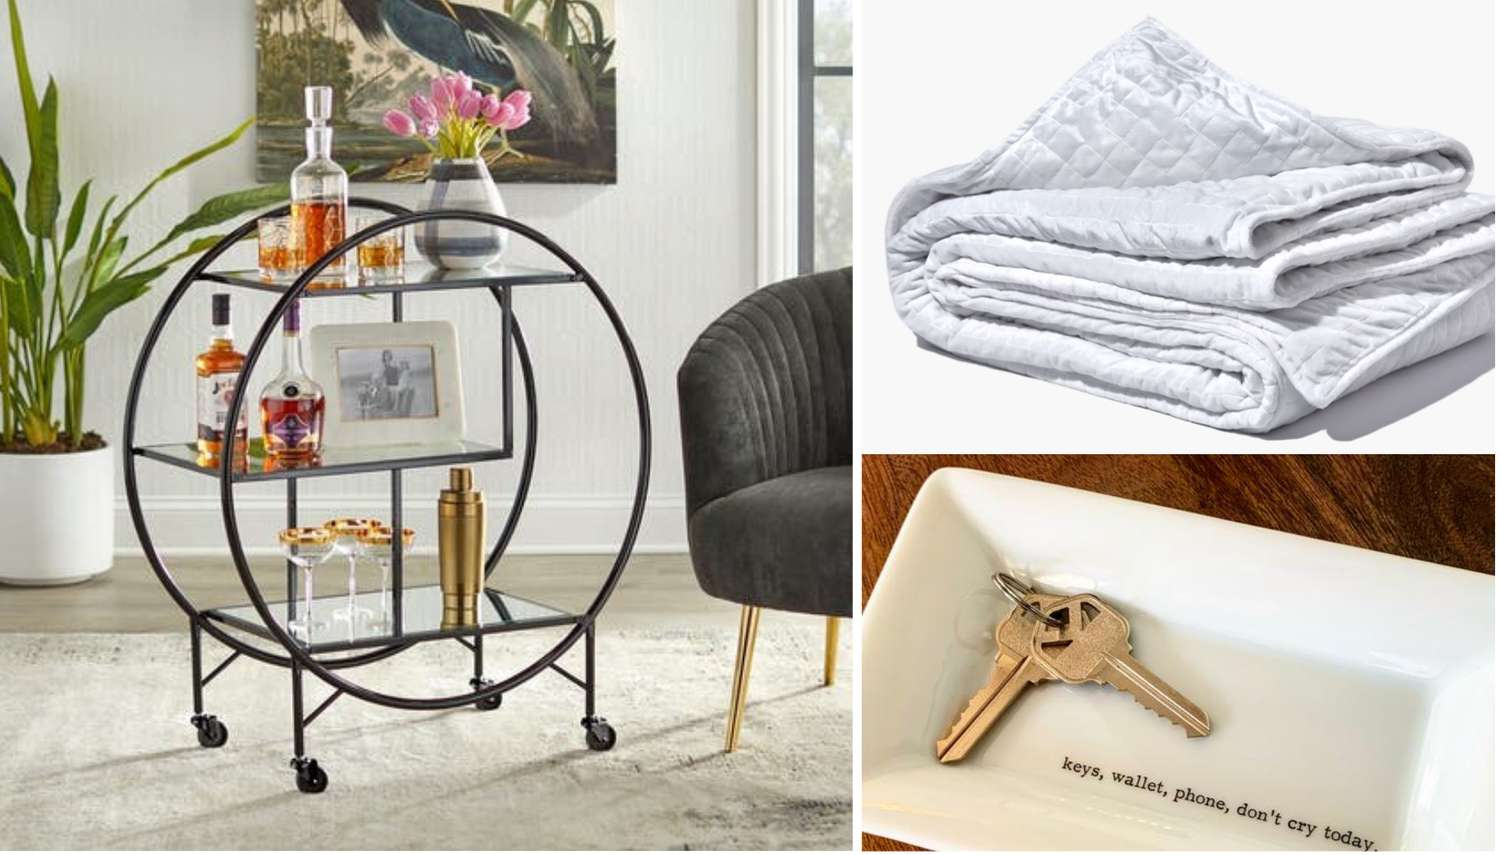 bar cart, weight blanket, key tray for zodiac signs